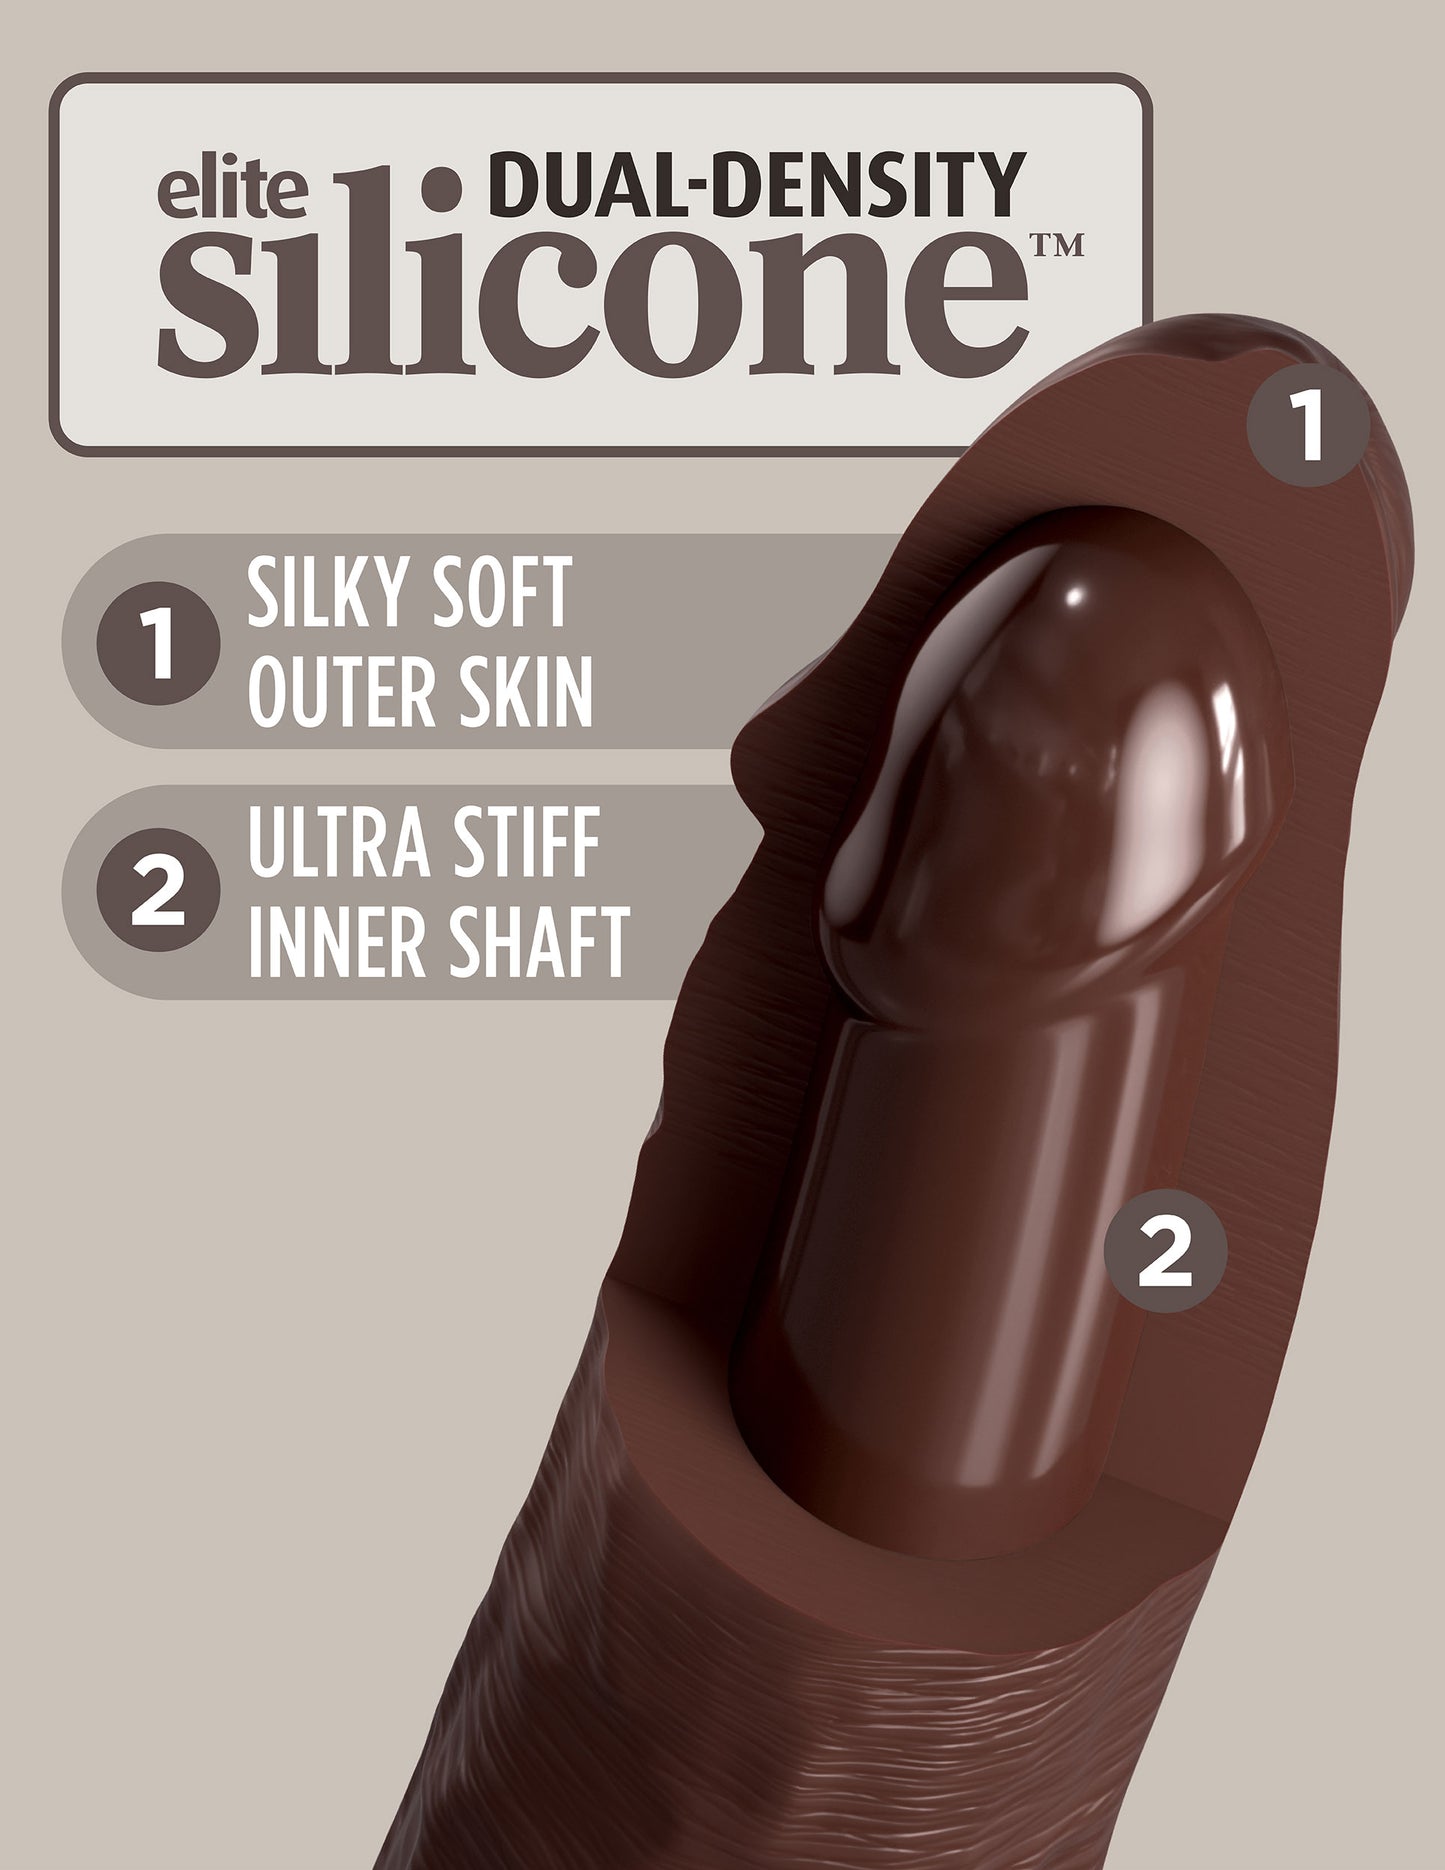 King Cock Elite 8 Inch Dual Density Silicone Cock  - Brown PD5772-29